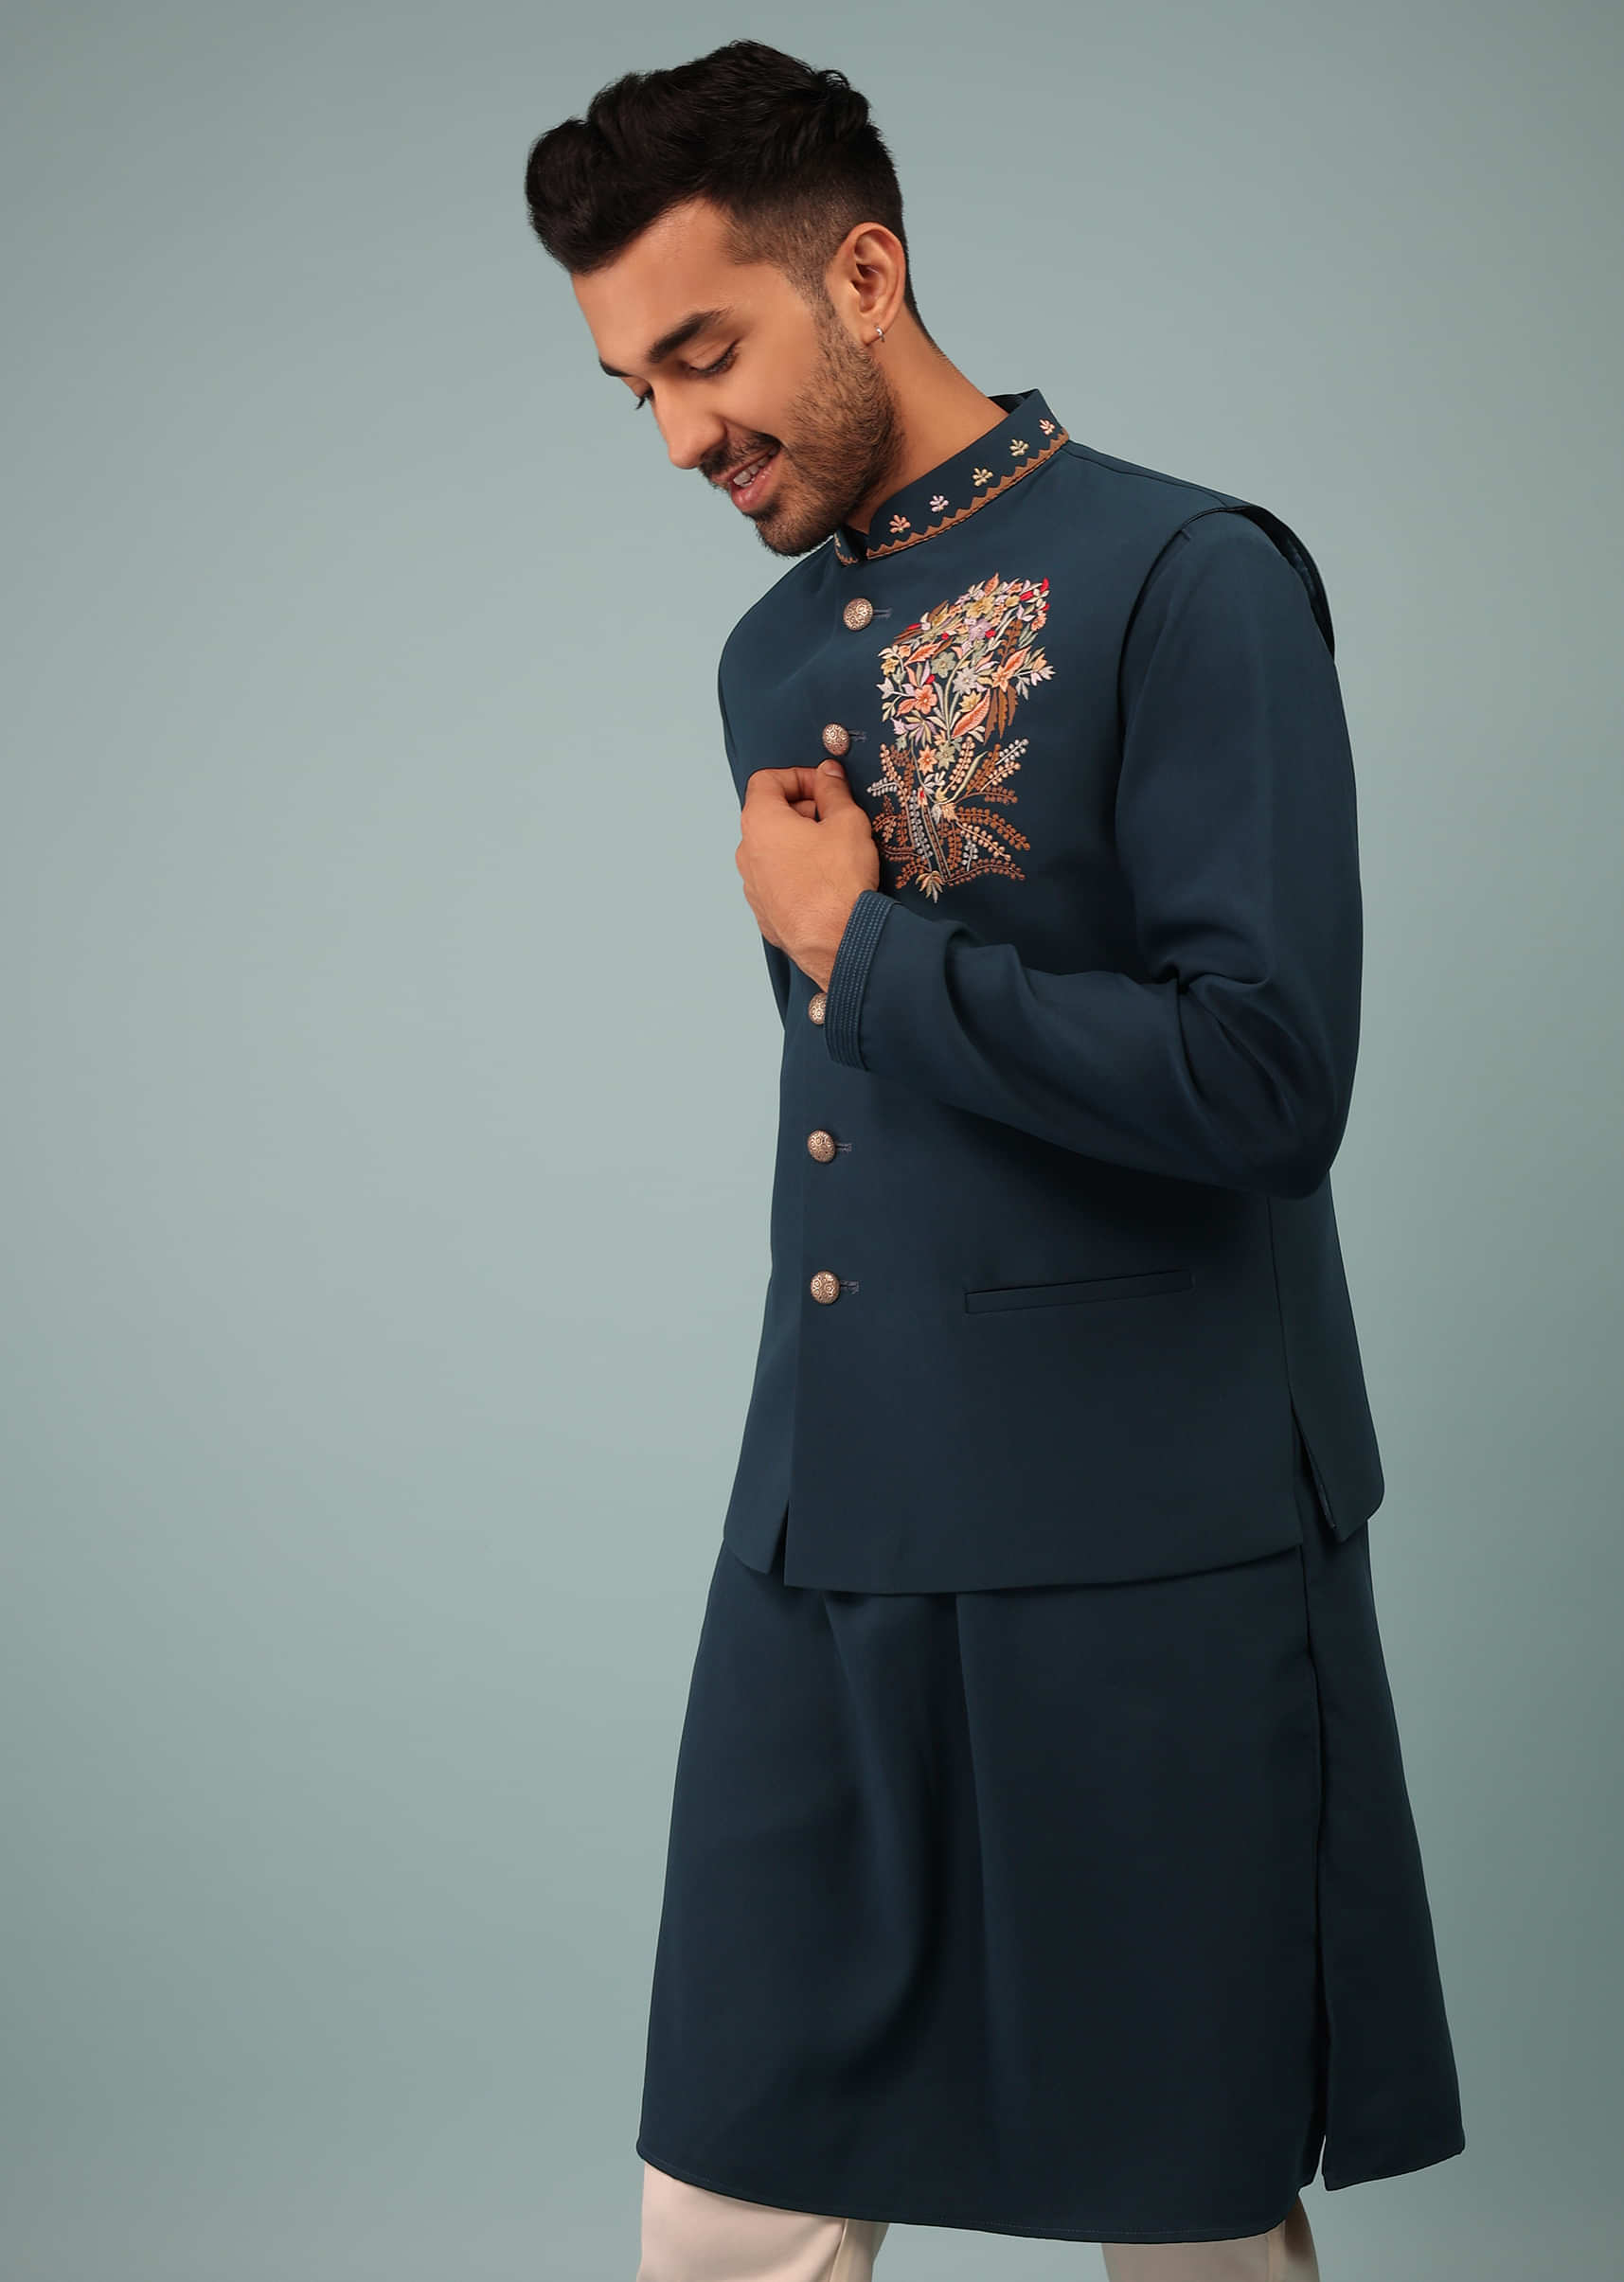 Teal Blue Bandi Jacket Set In Handloom Poly Wool With Multicolor Floral Butti Embroidery